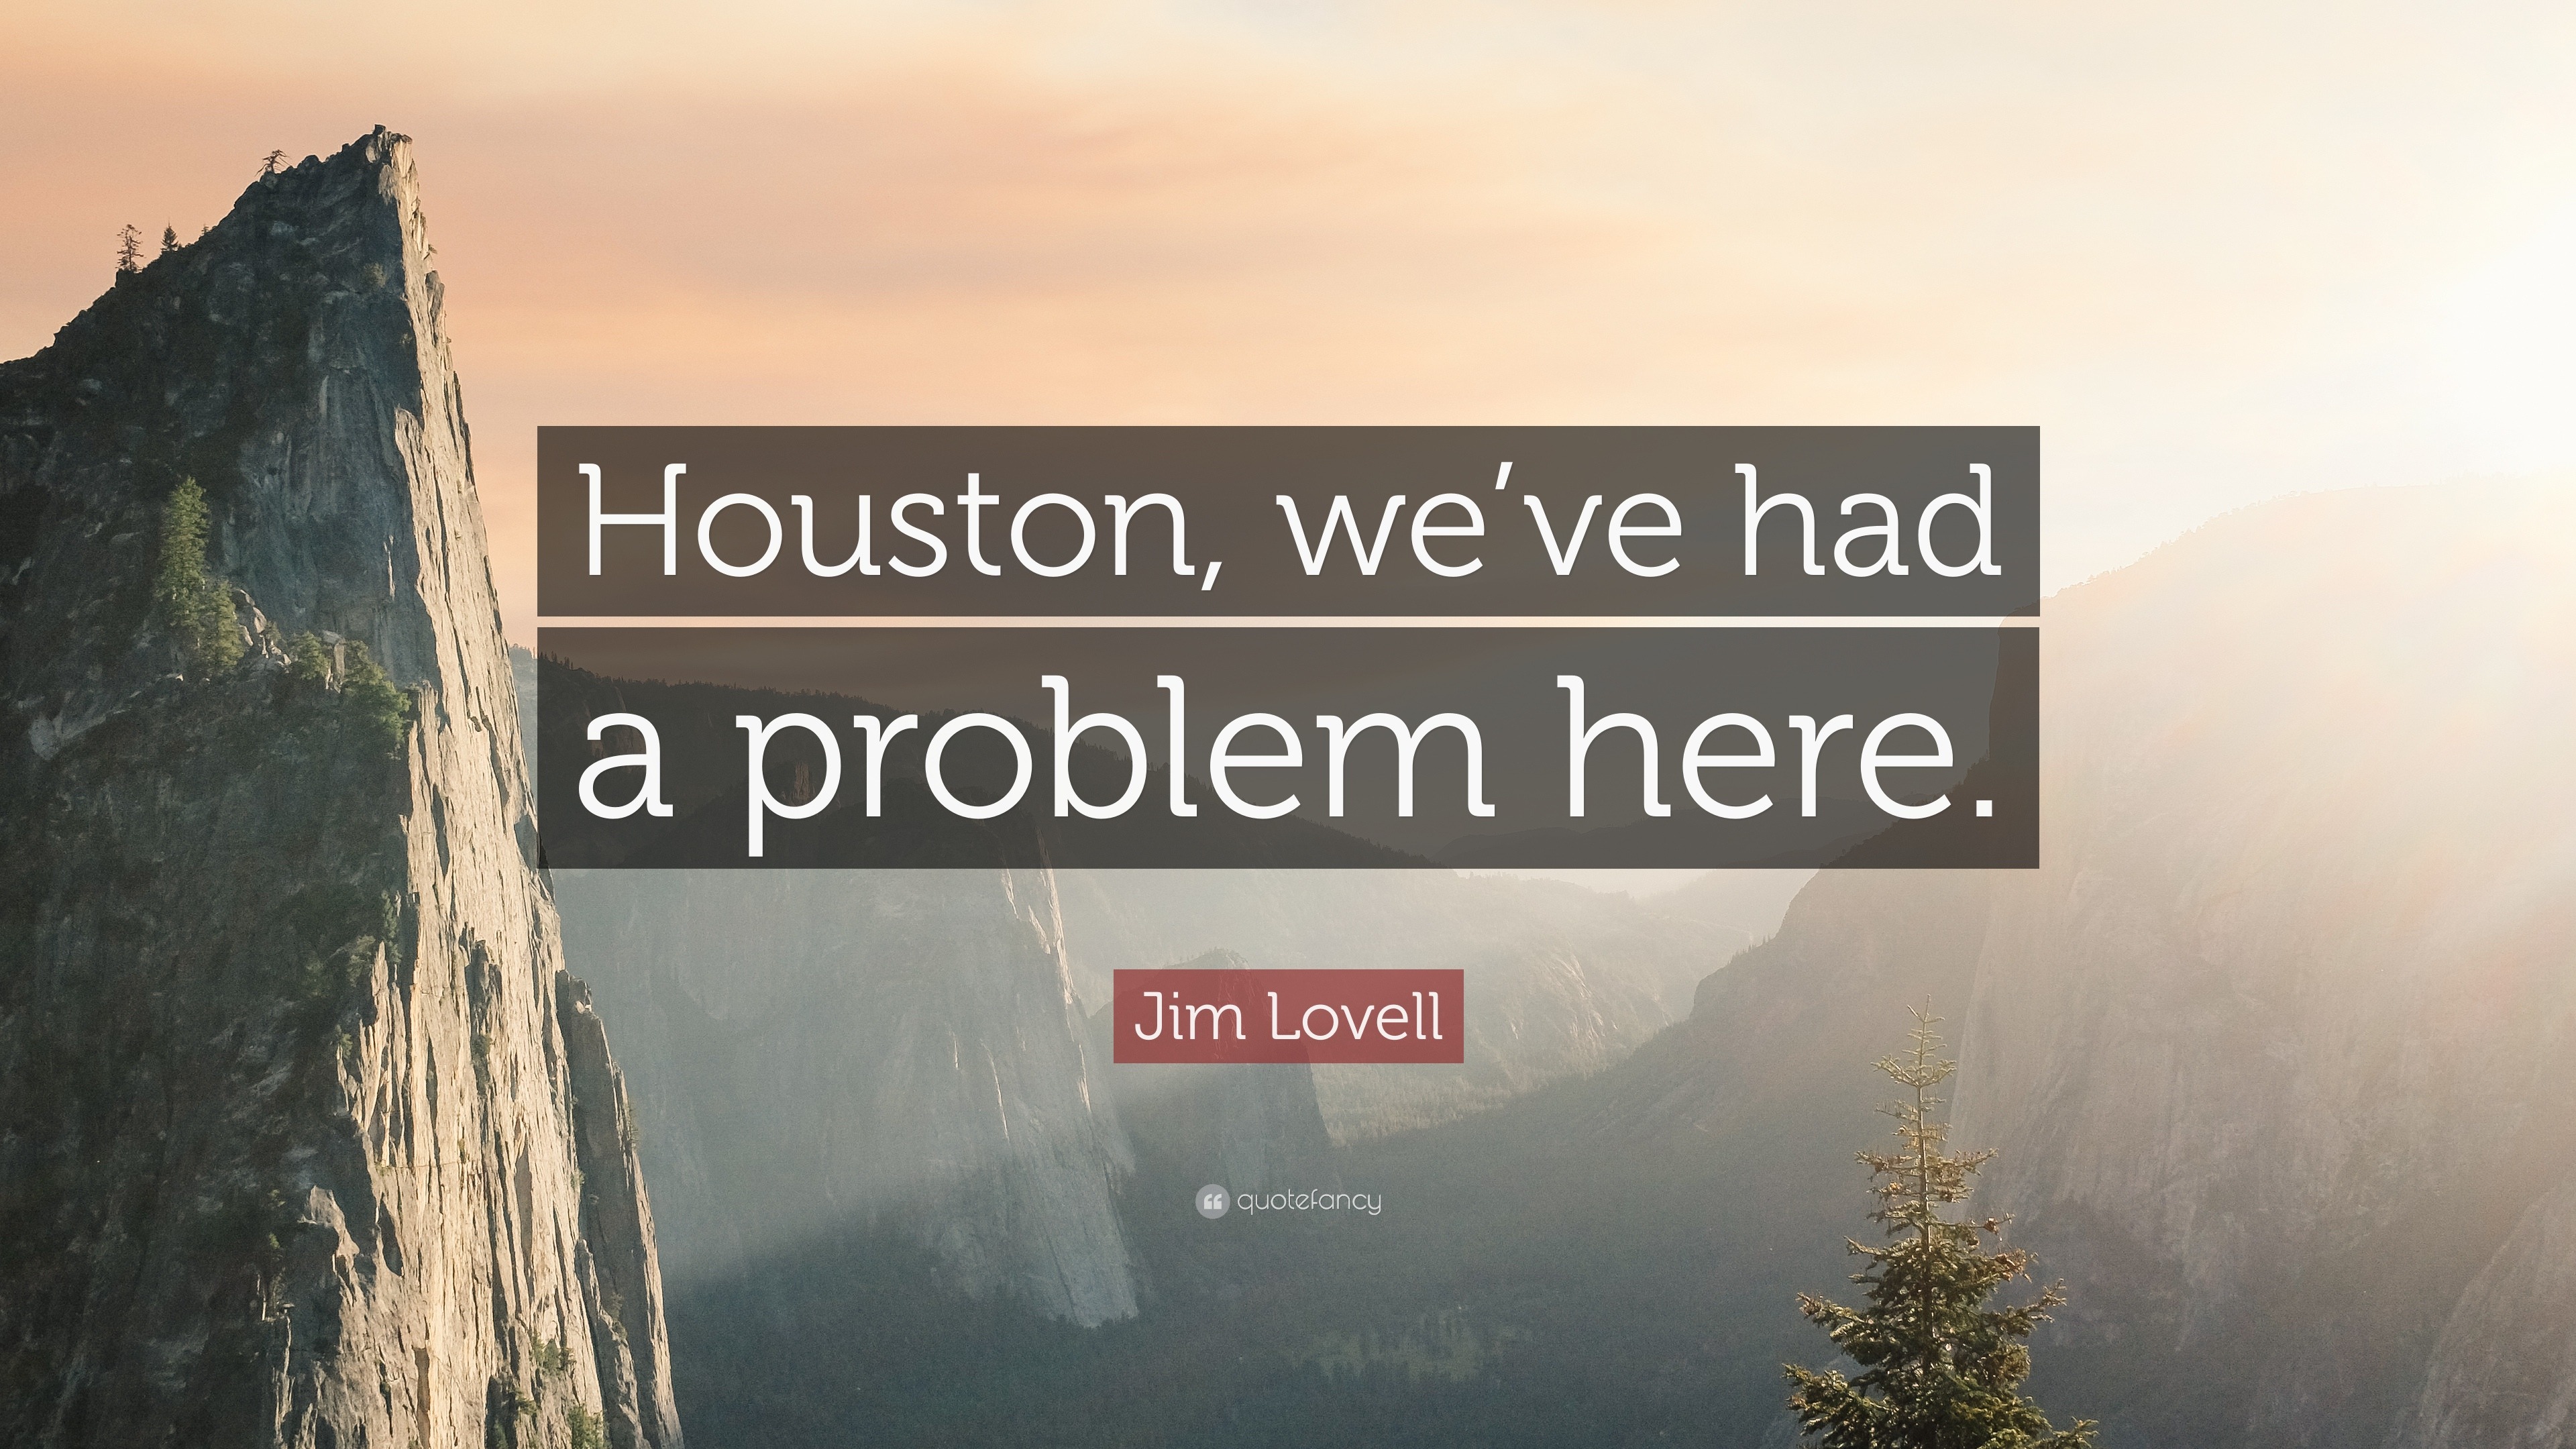 Jim Lovell Quote: “Houston, we've had a problem here.”